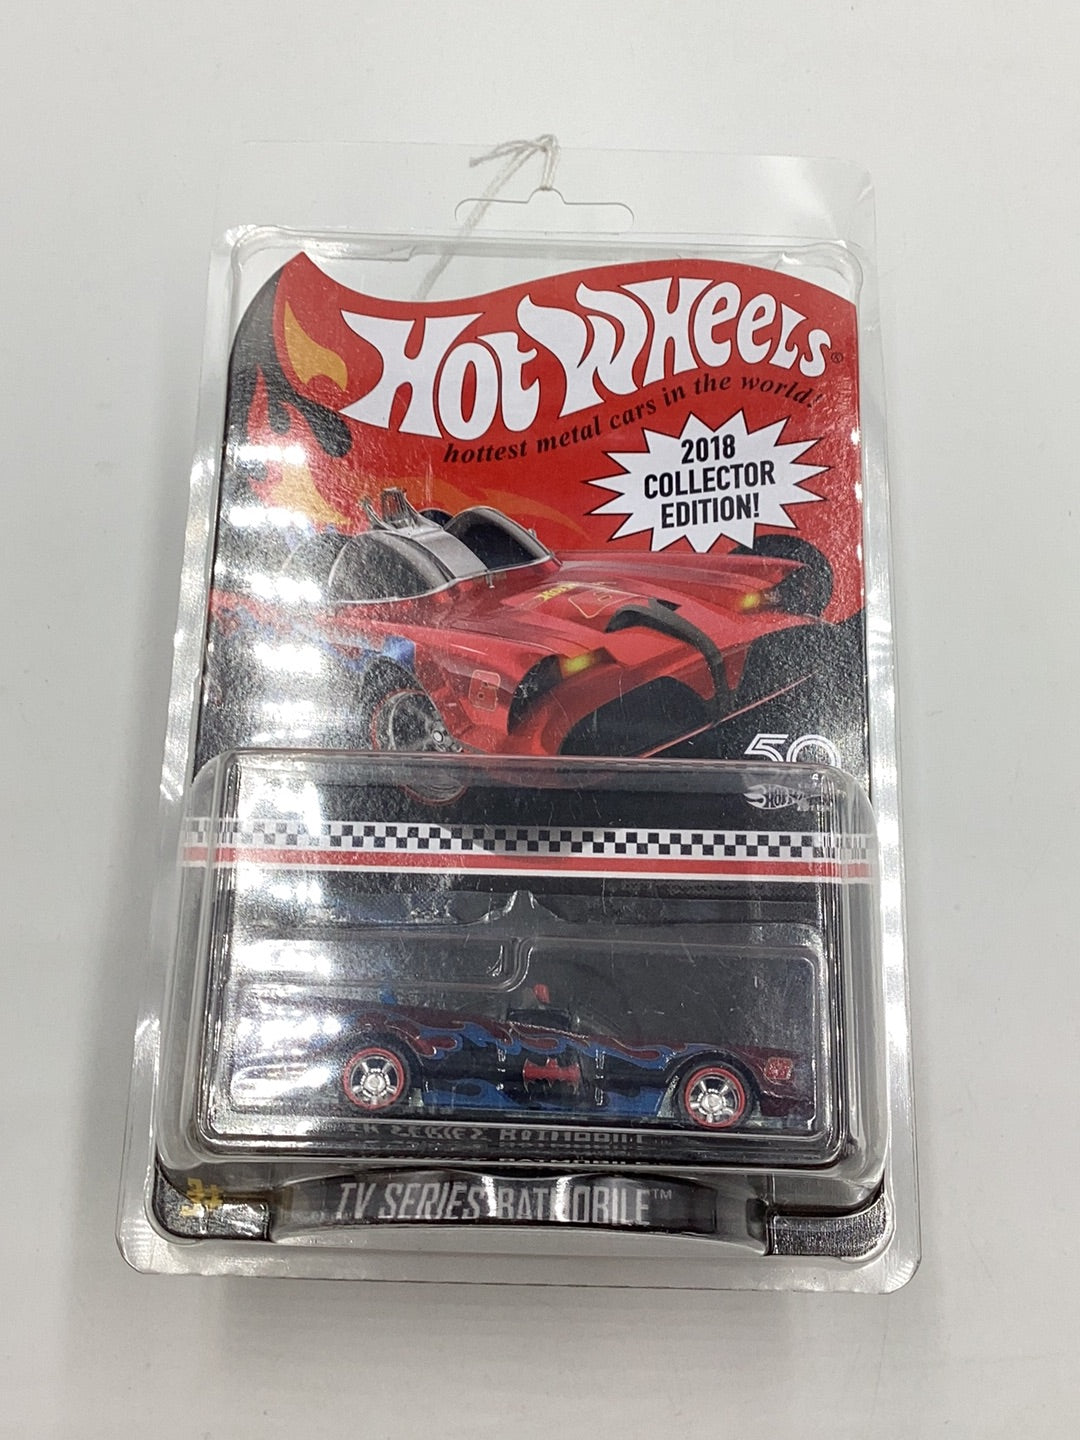 2018 Mail In Hot wheels 1966 TV Series Batmobile with Protector